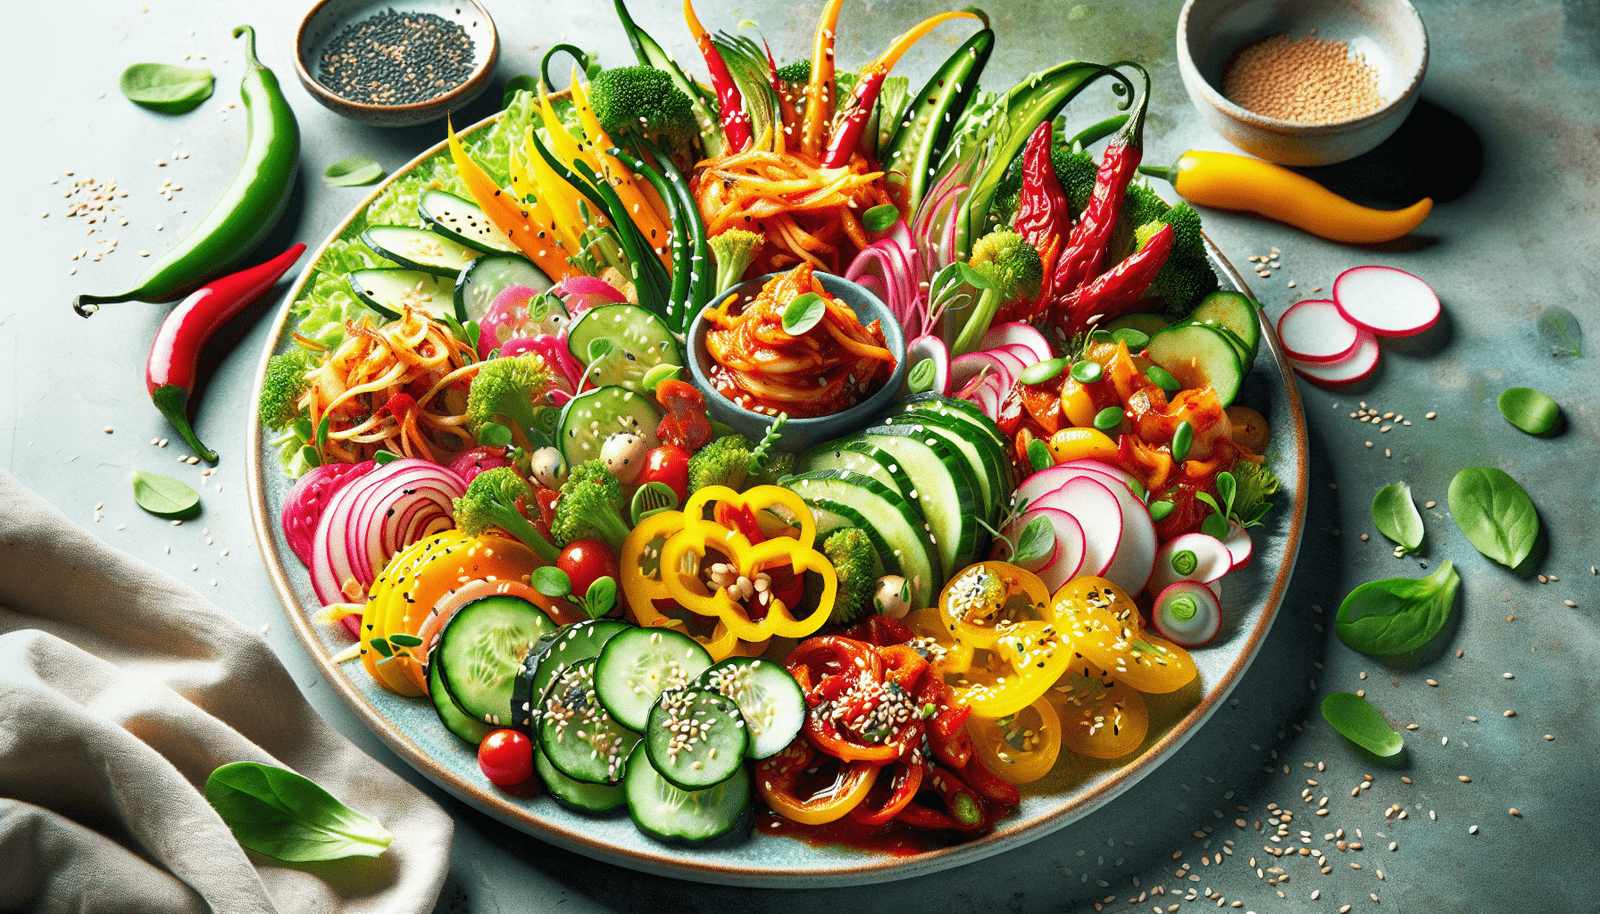 Can You Share Innovative Ideas For Incorporating Korean Ingredients Into Salads?